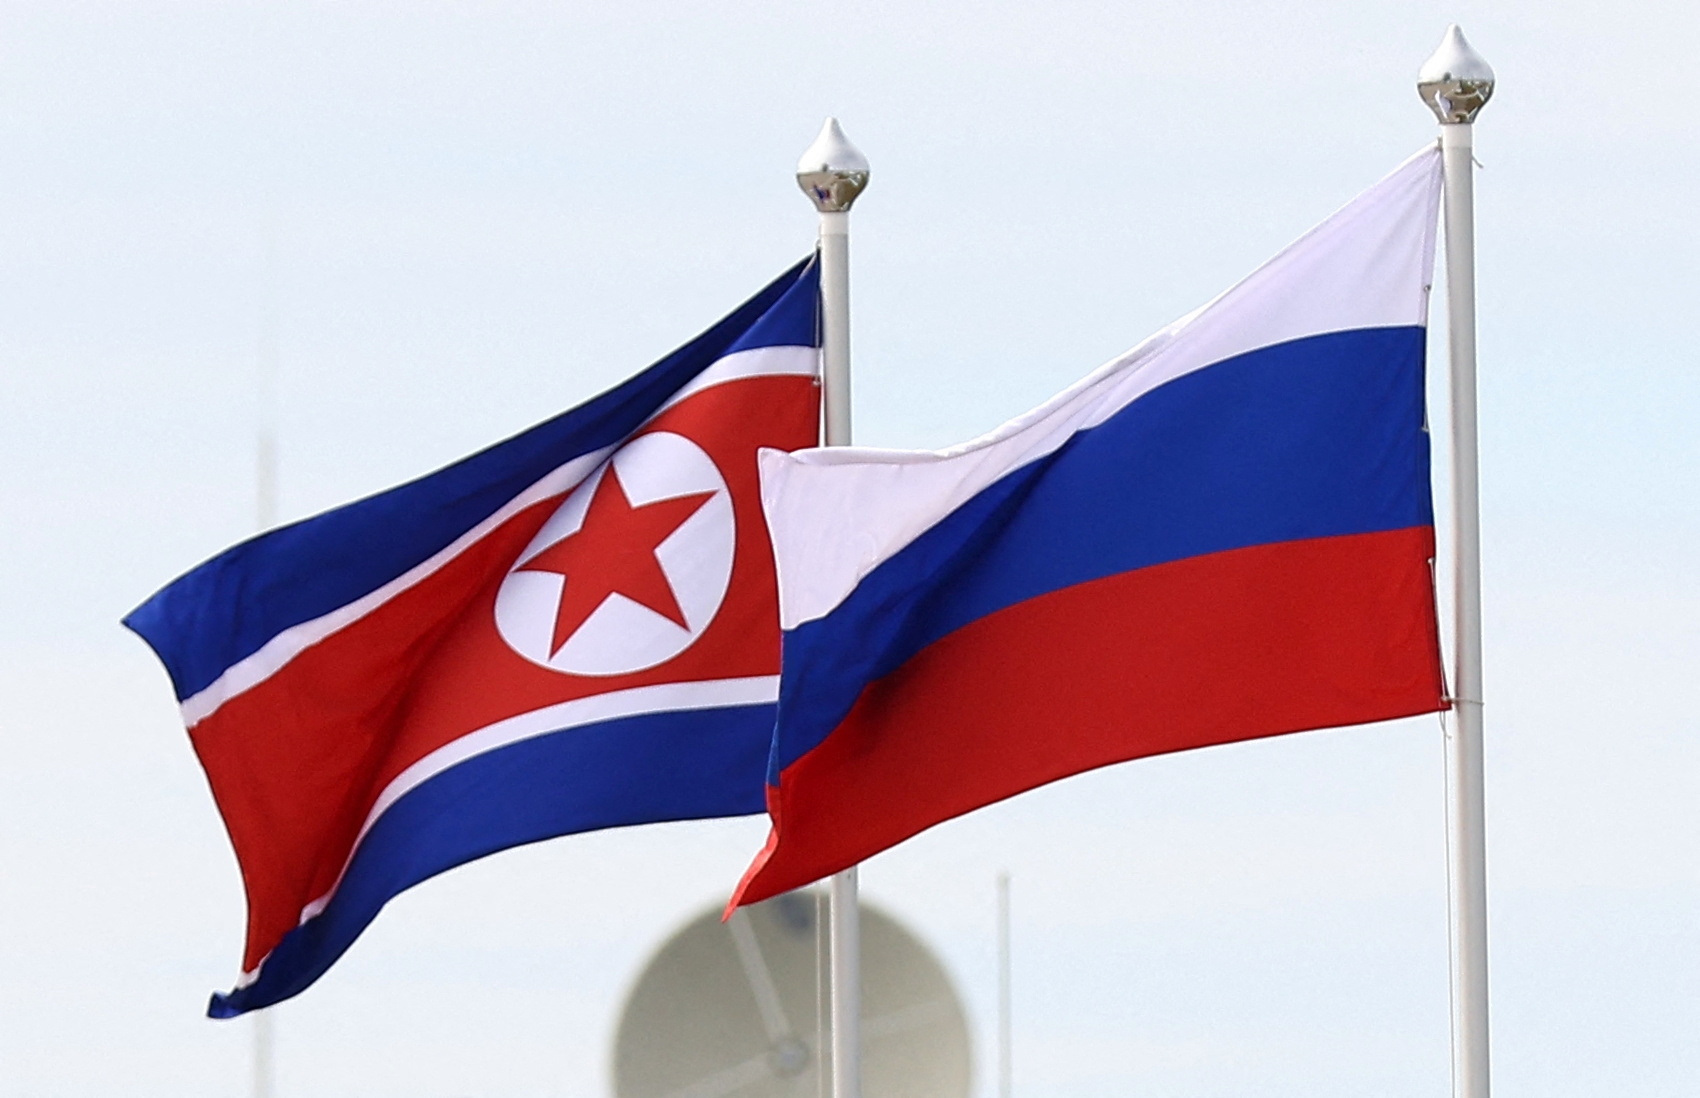 FILE PHOTO: Russian and North Korean flags fly at the Vostochny Сosmodrome, the venue of the meeting between Russia's President Vladimir Putin and North Korea's leader Kim Jong Un, in the far eastern Amur region, Russia, September 13, 2023. Sputnik/Artem Geodakyan/Pool via REUTERS